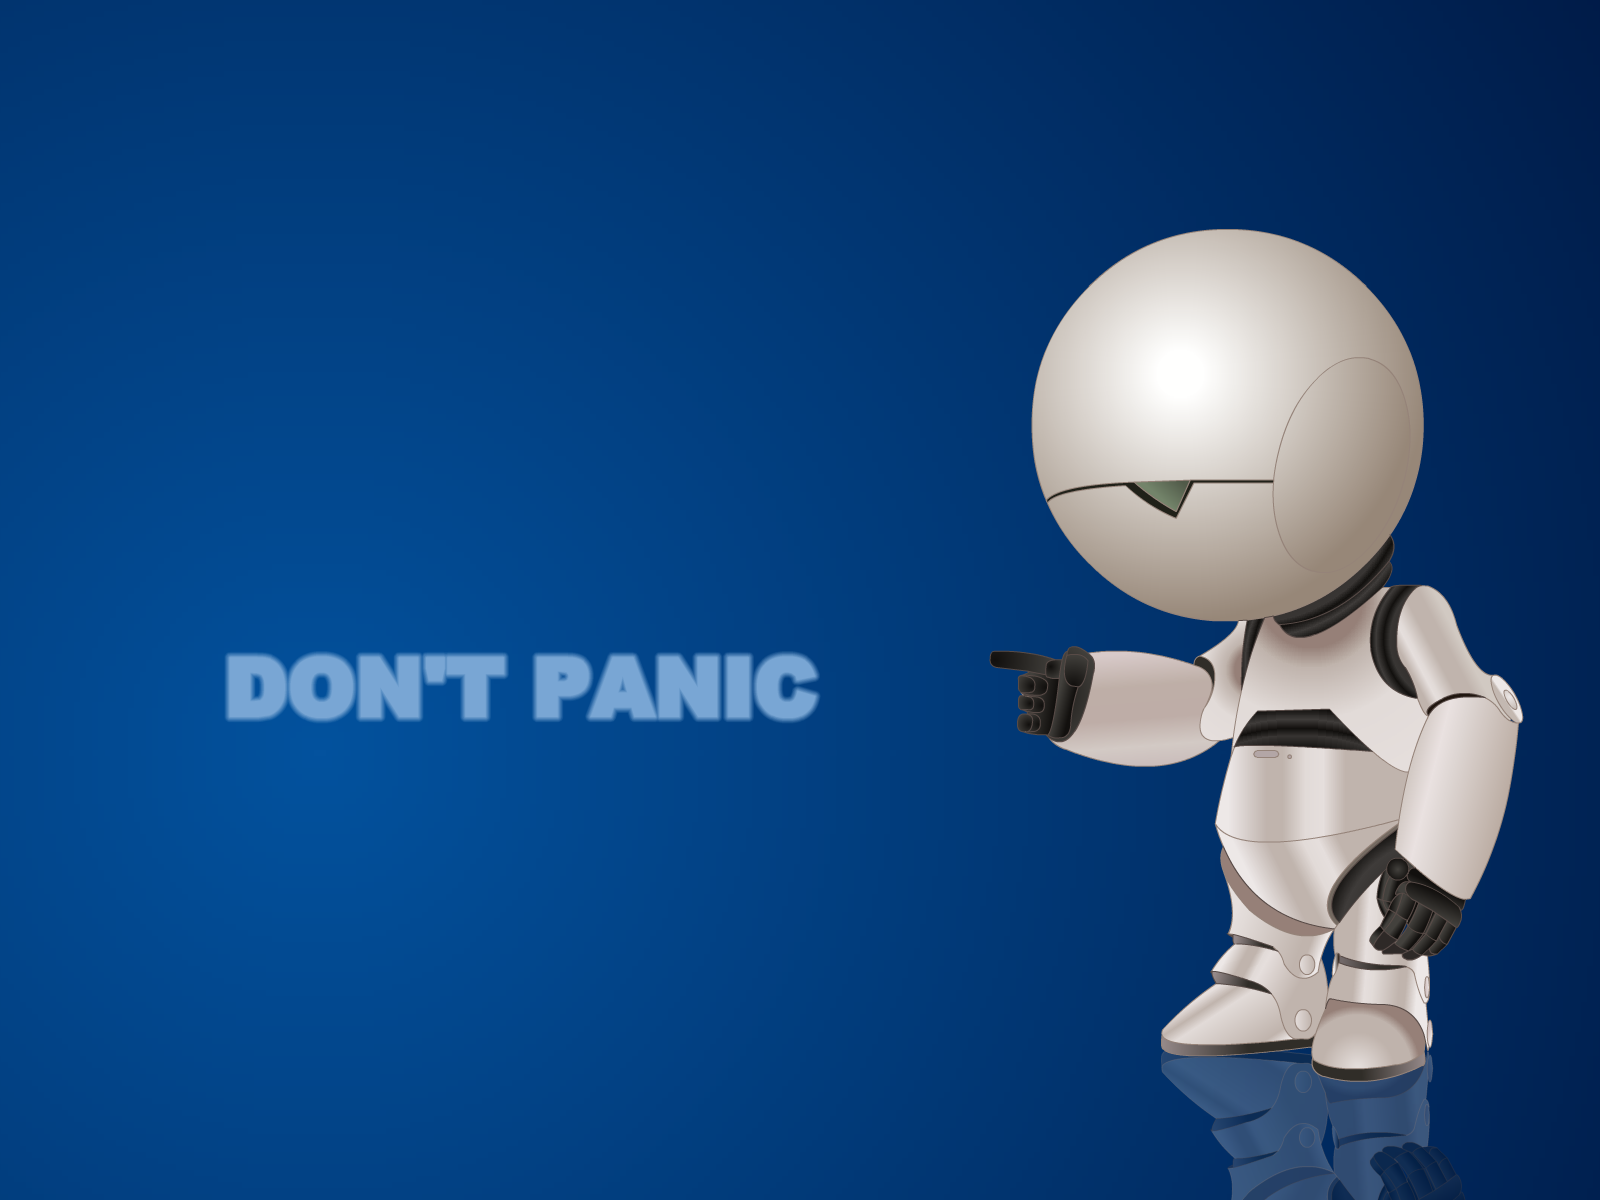 DONT PANIC by everfalling on DeviantArt